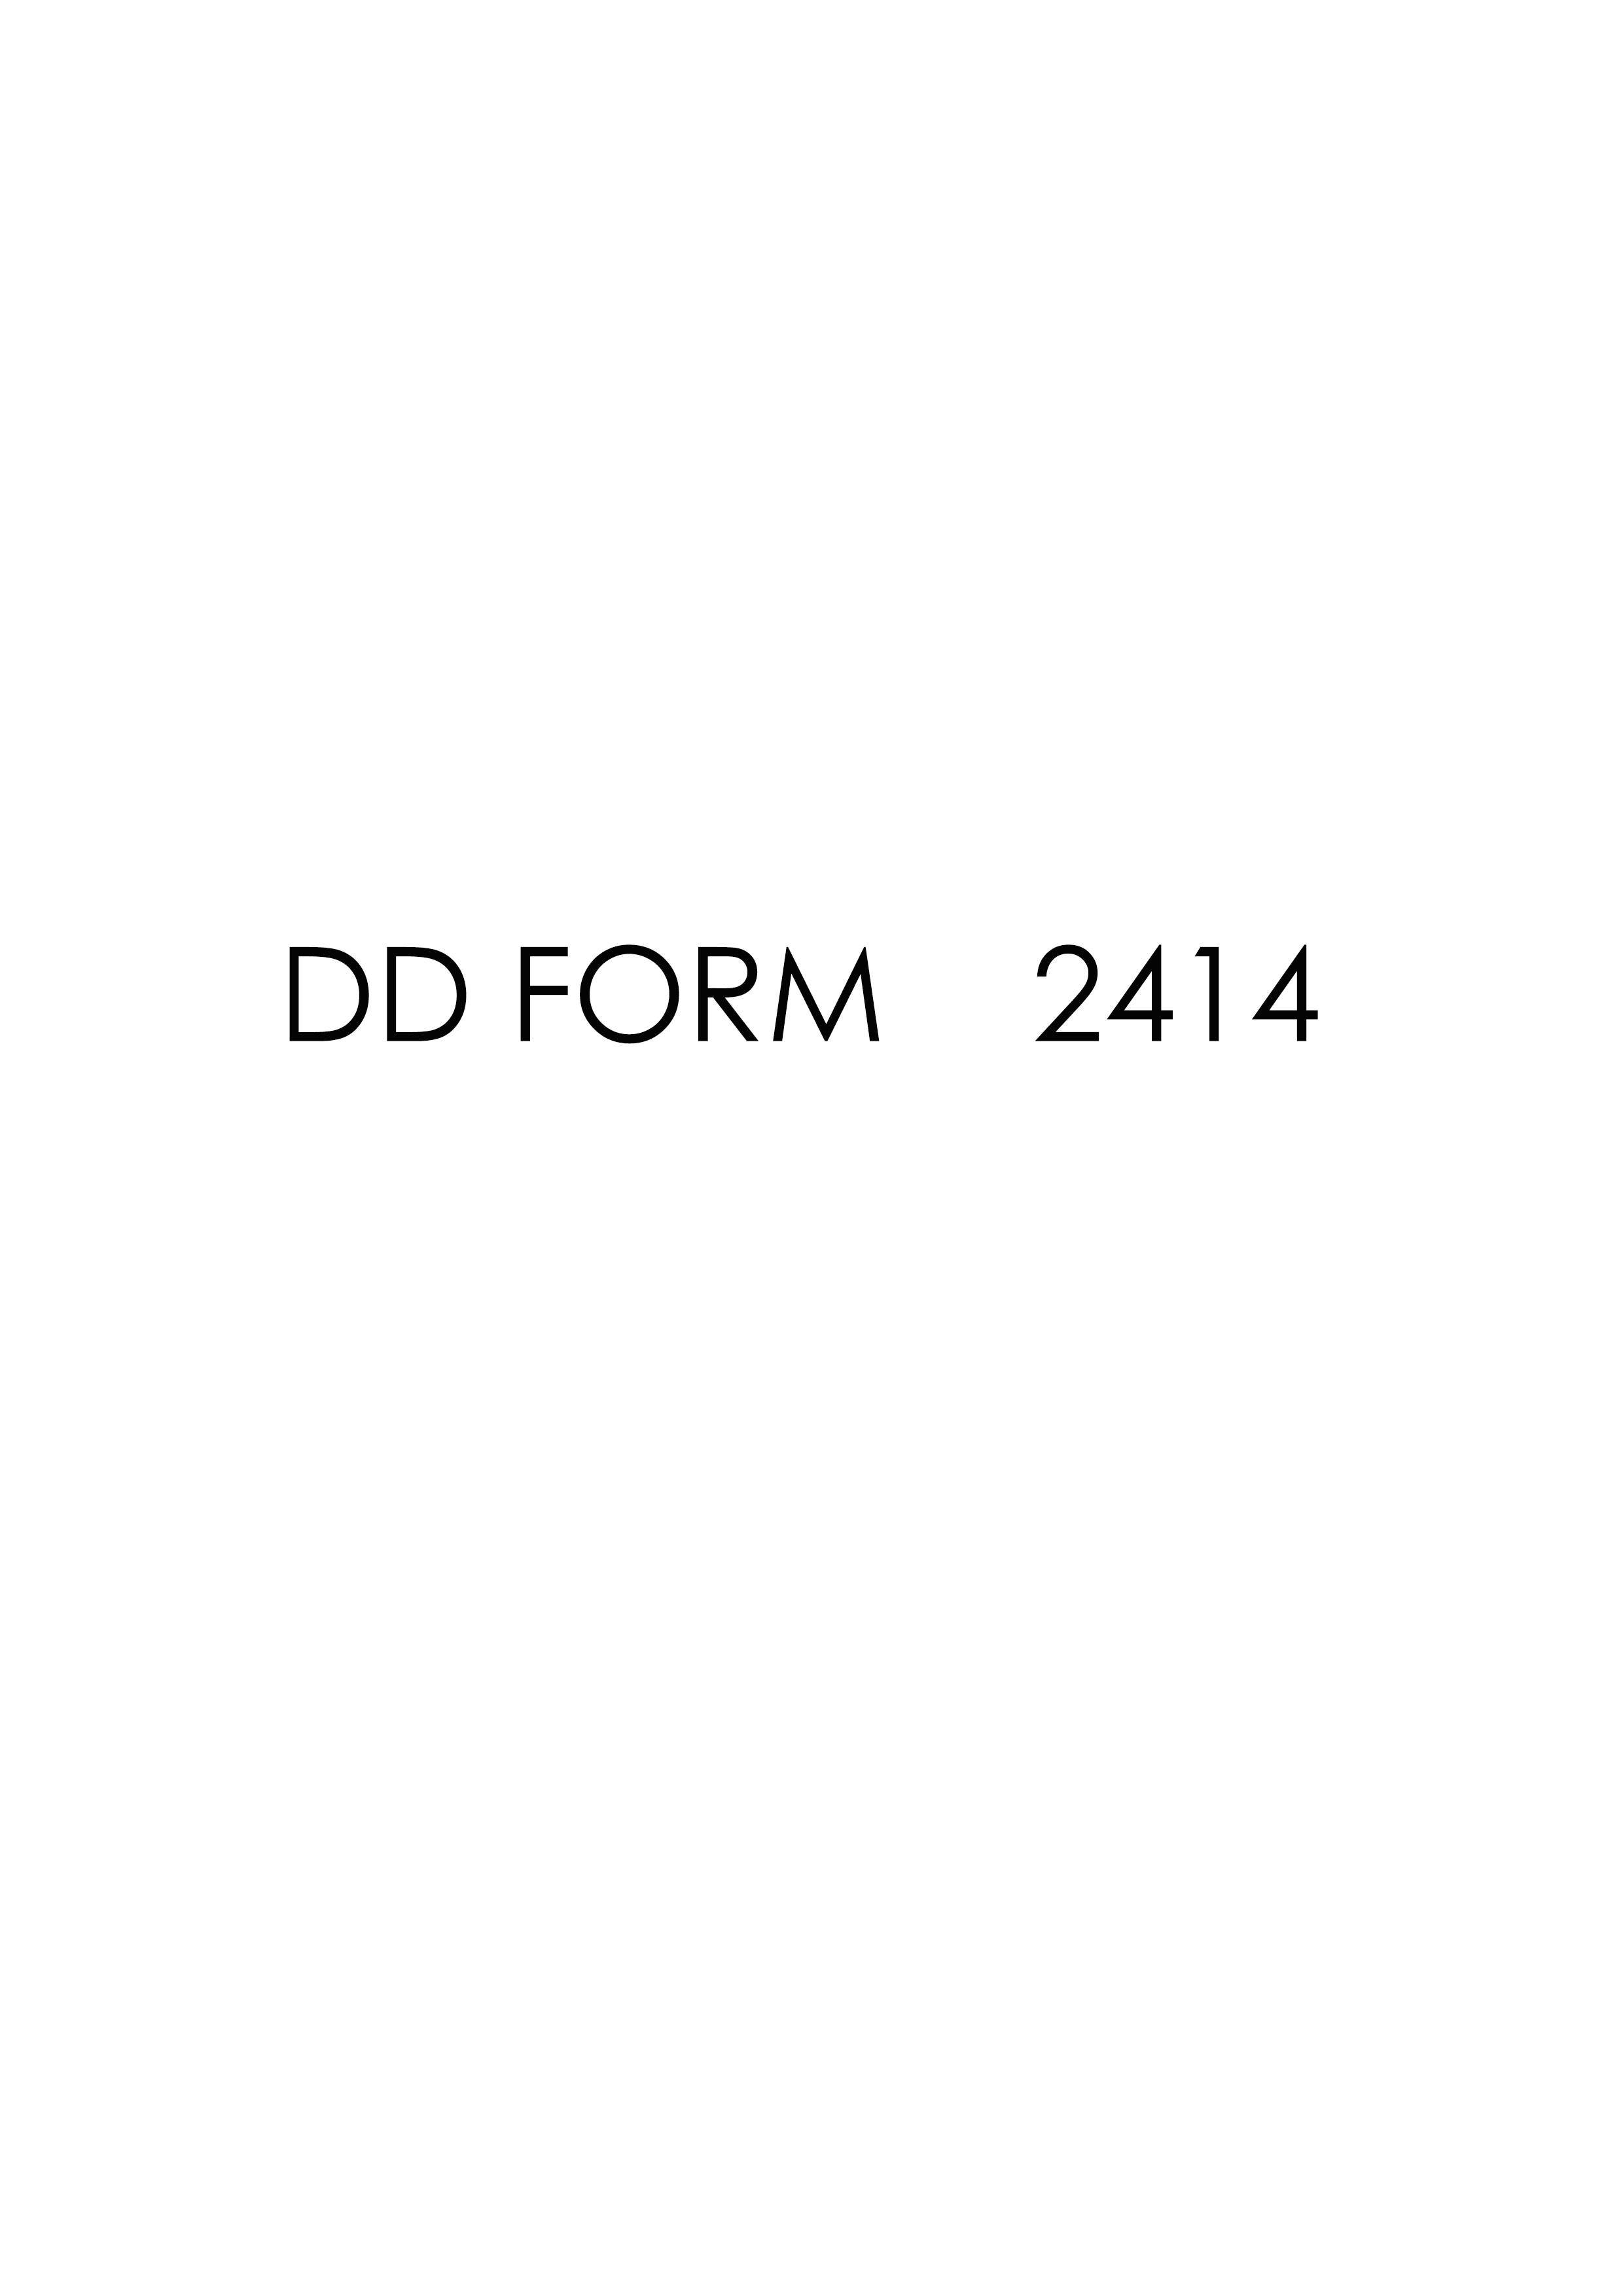 Download Fillable dd Form 2414